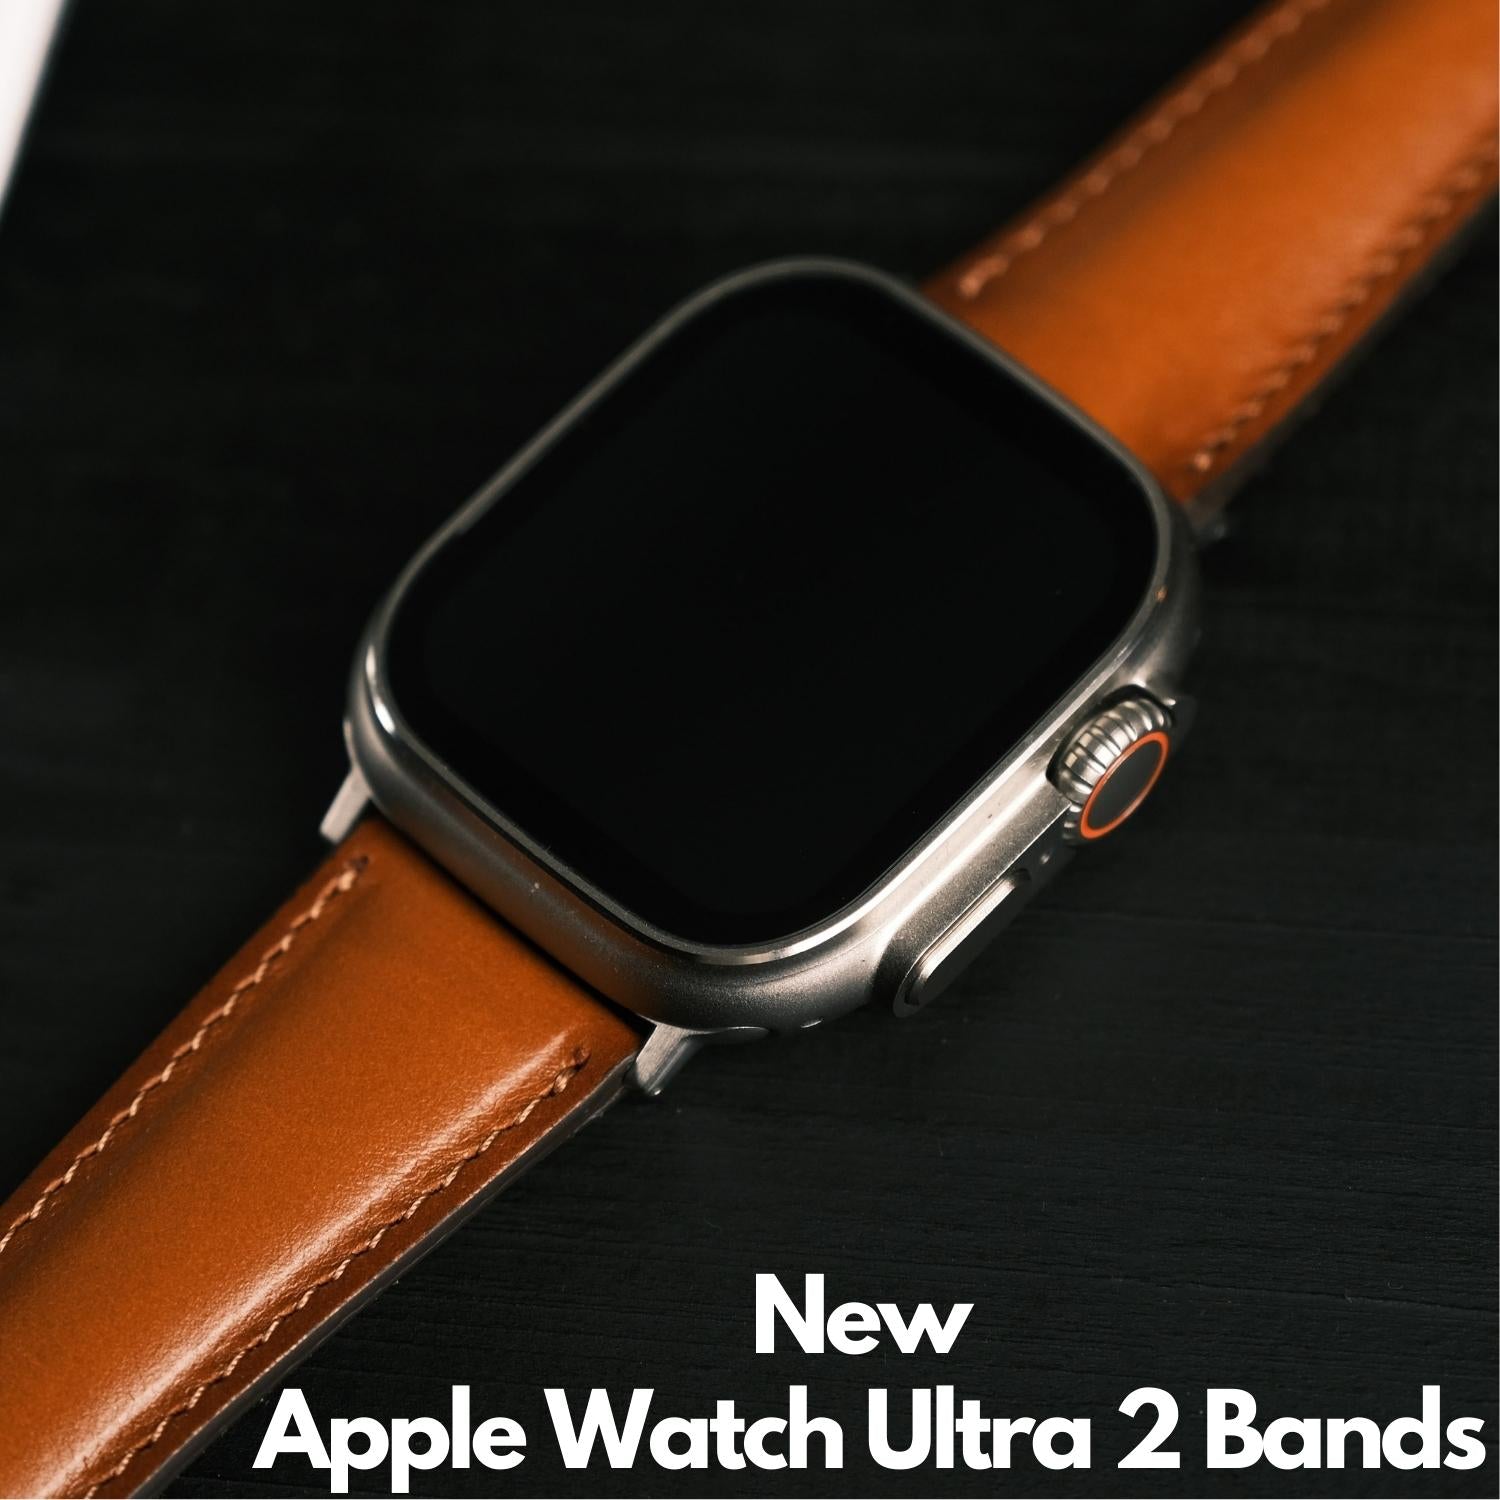 New Apple Watch Ultra 2 Bands